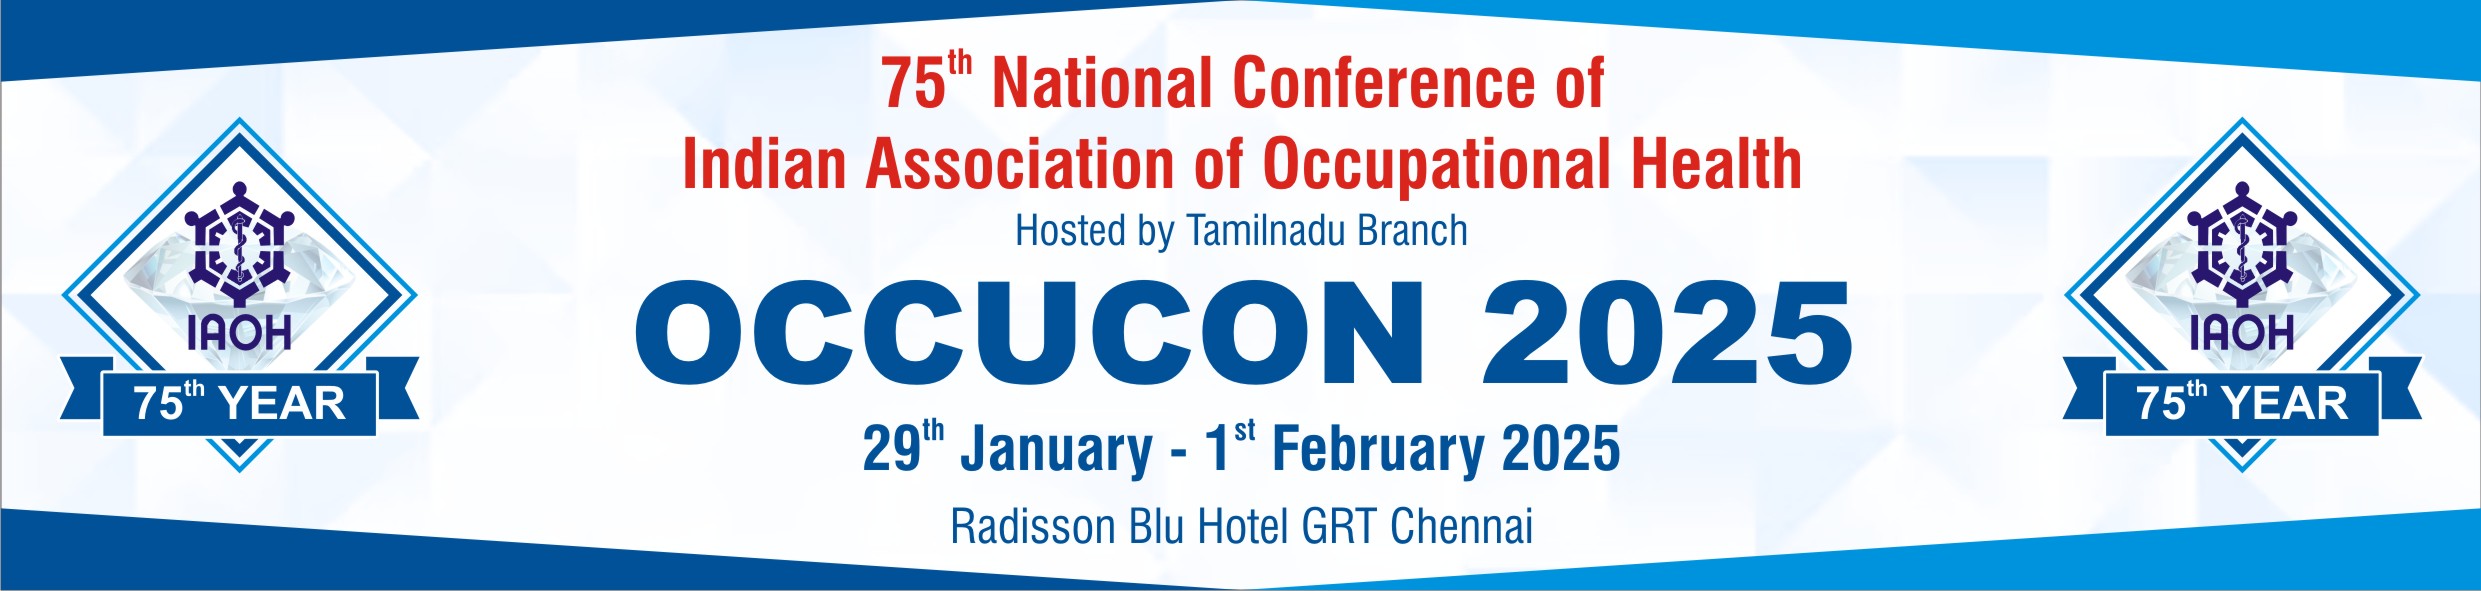 75th National Conference of Indian Association of Occupational Health - OCCUCON 2025